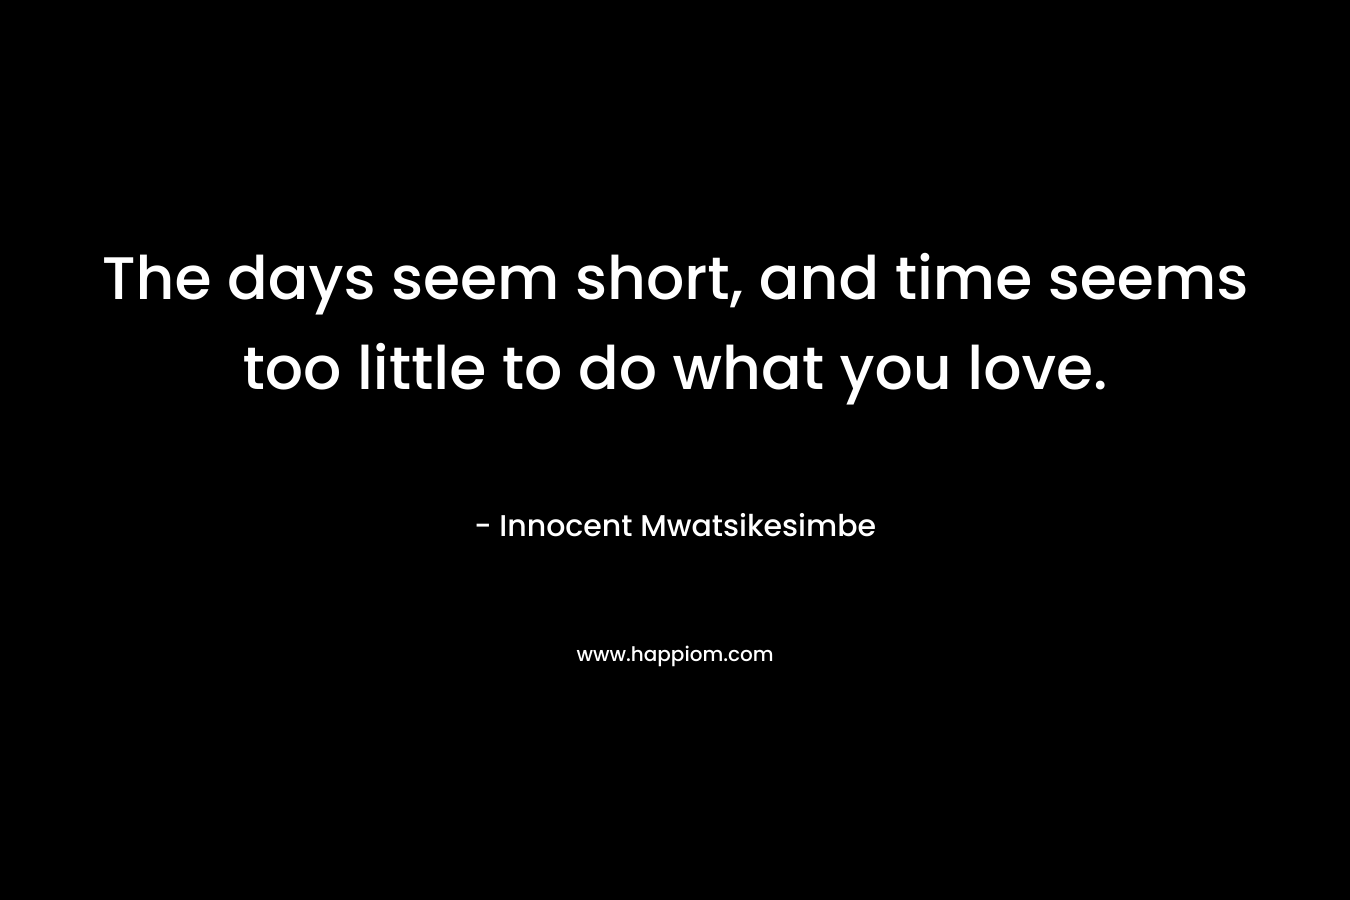 The days seem short, and time seems too little to do what you love.